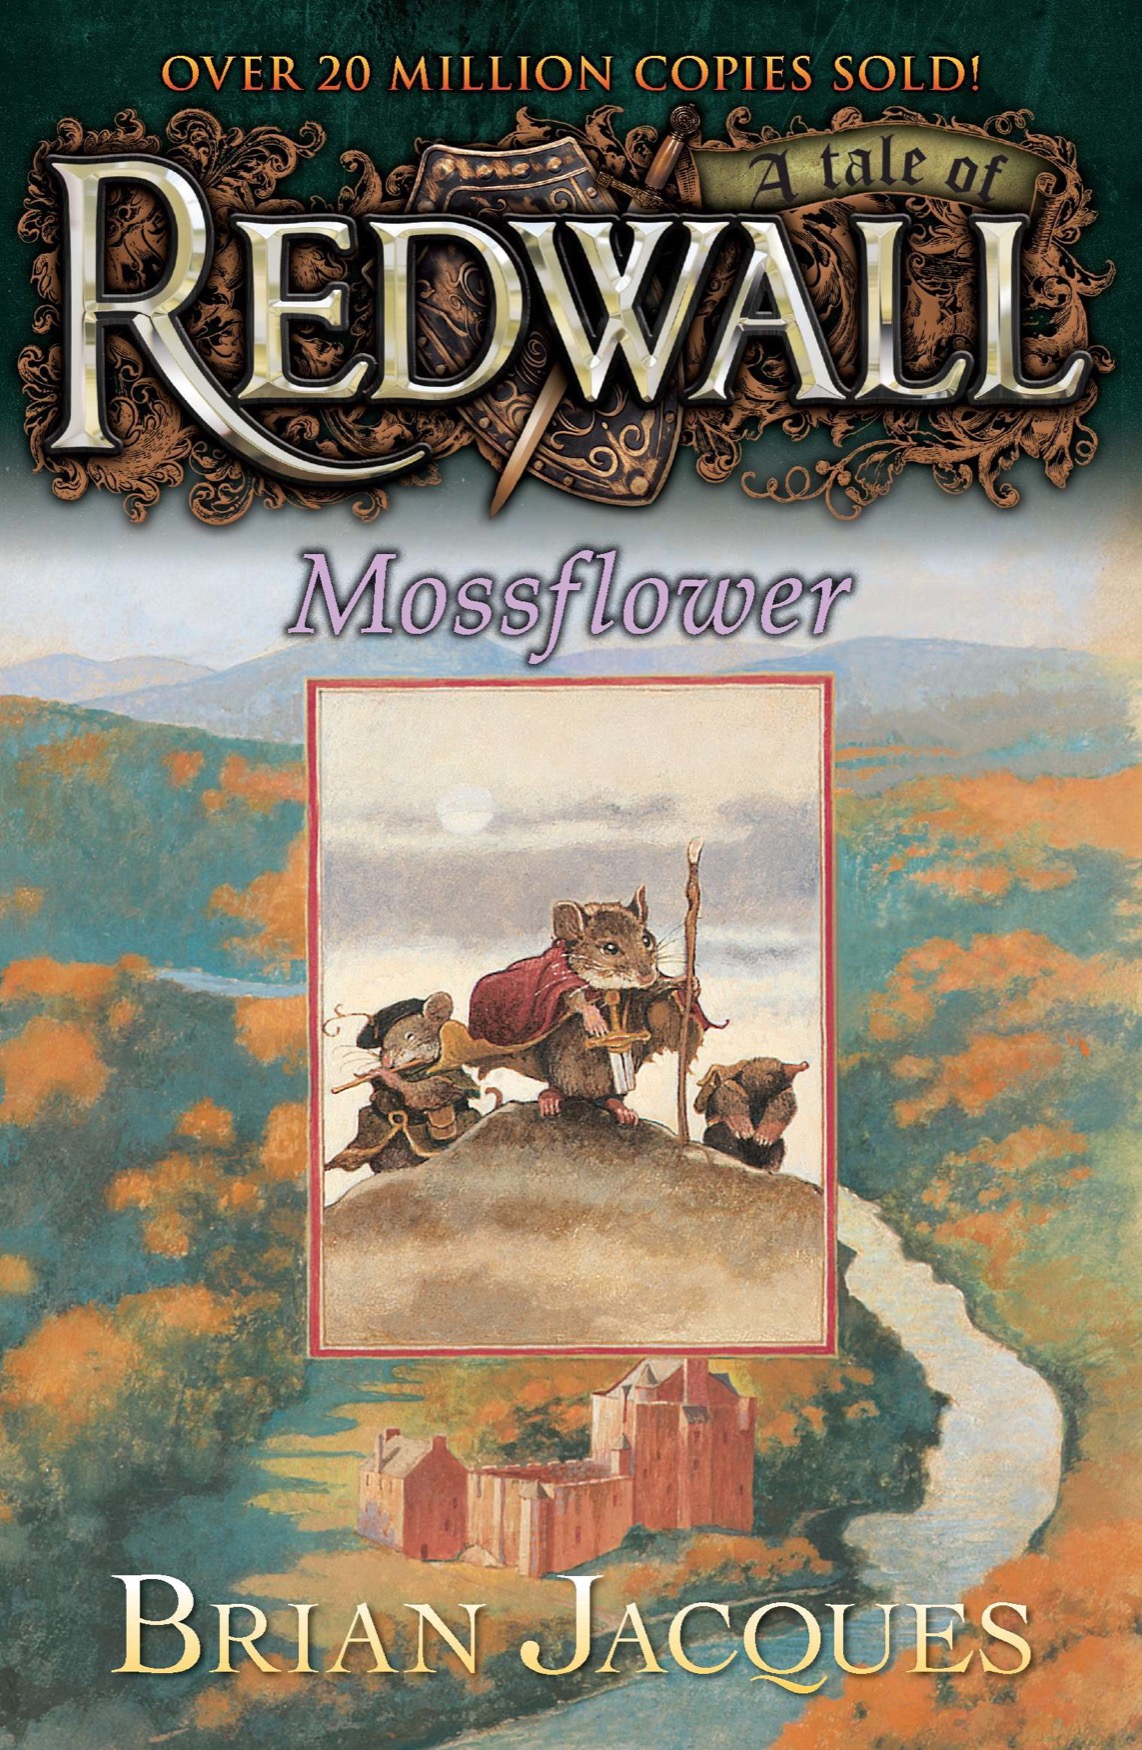 Book cover of Mossflower.